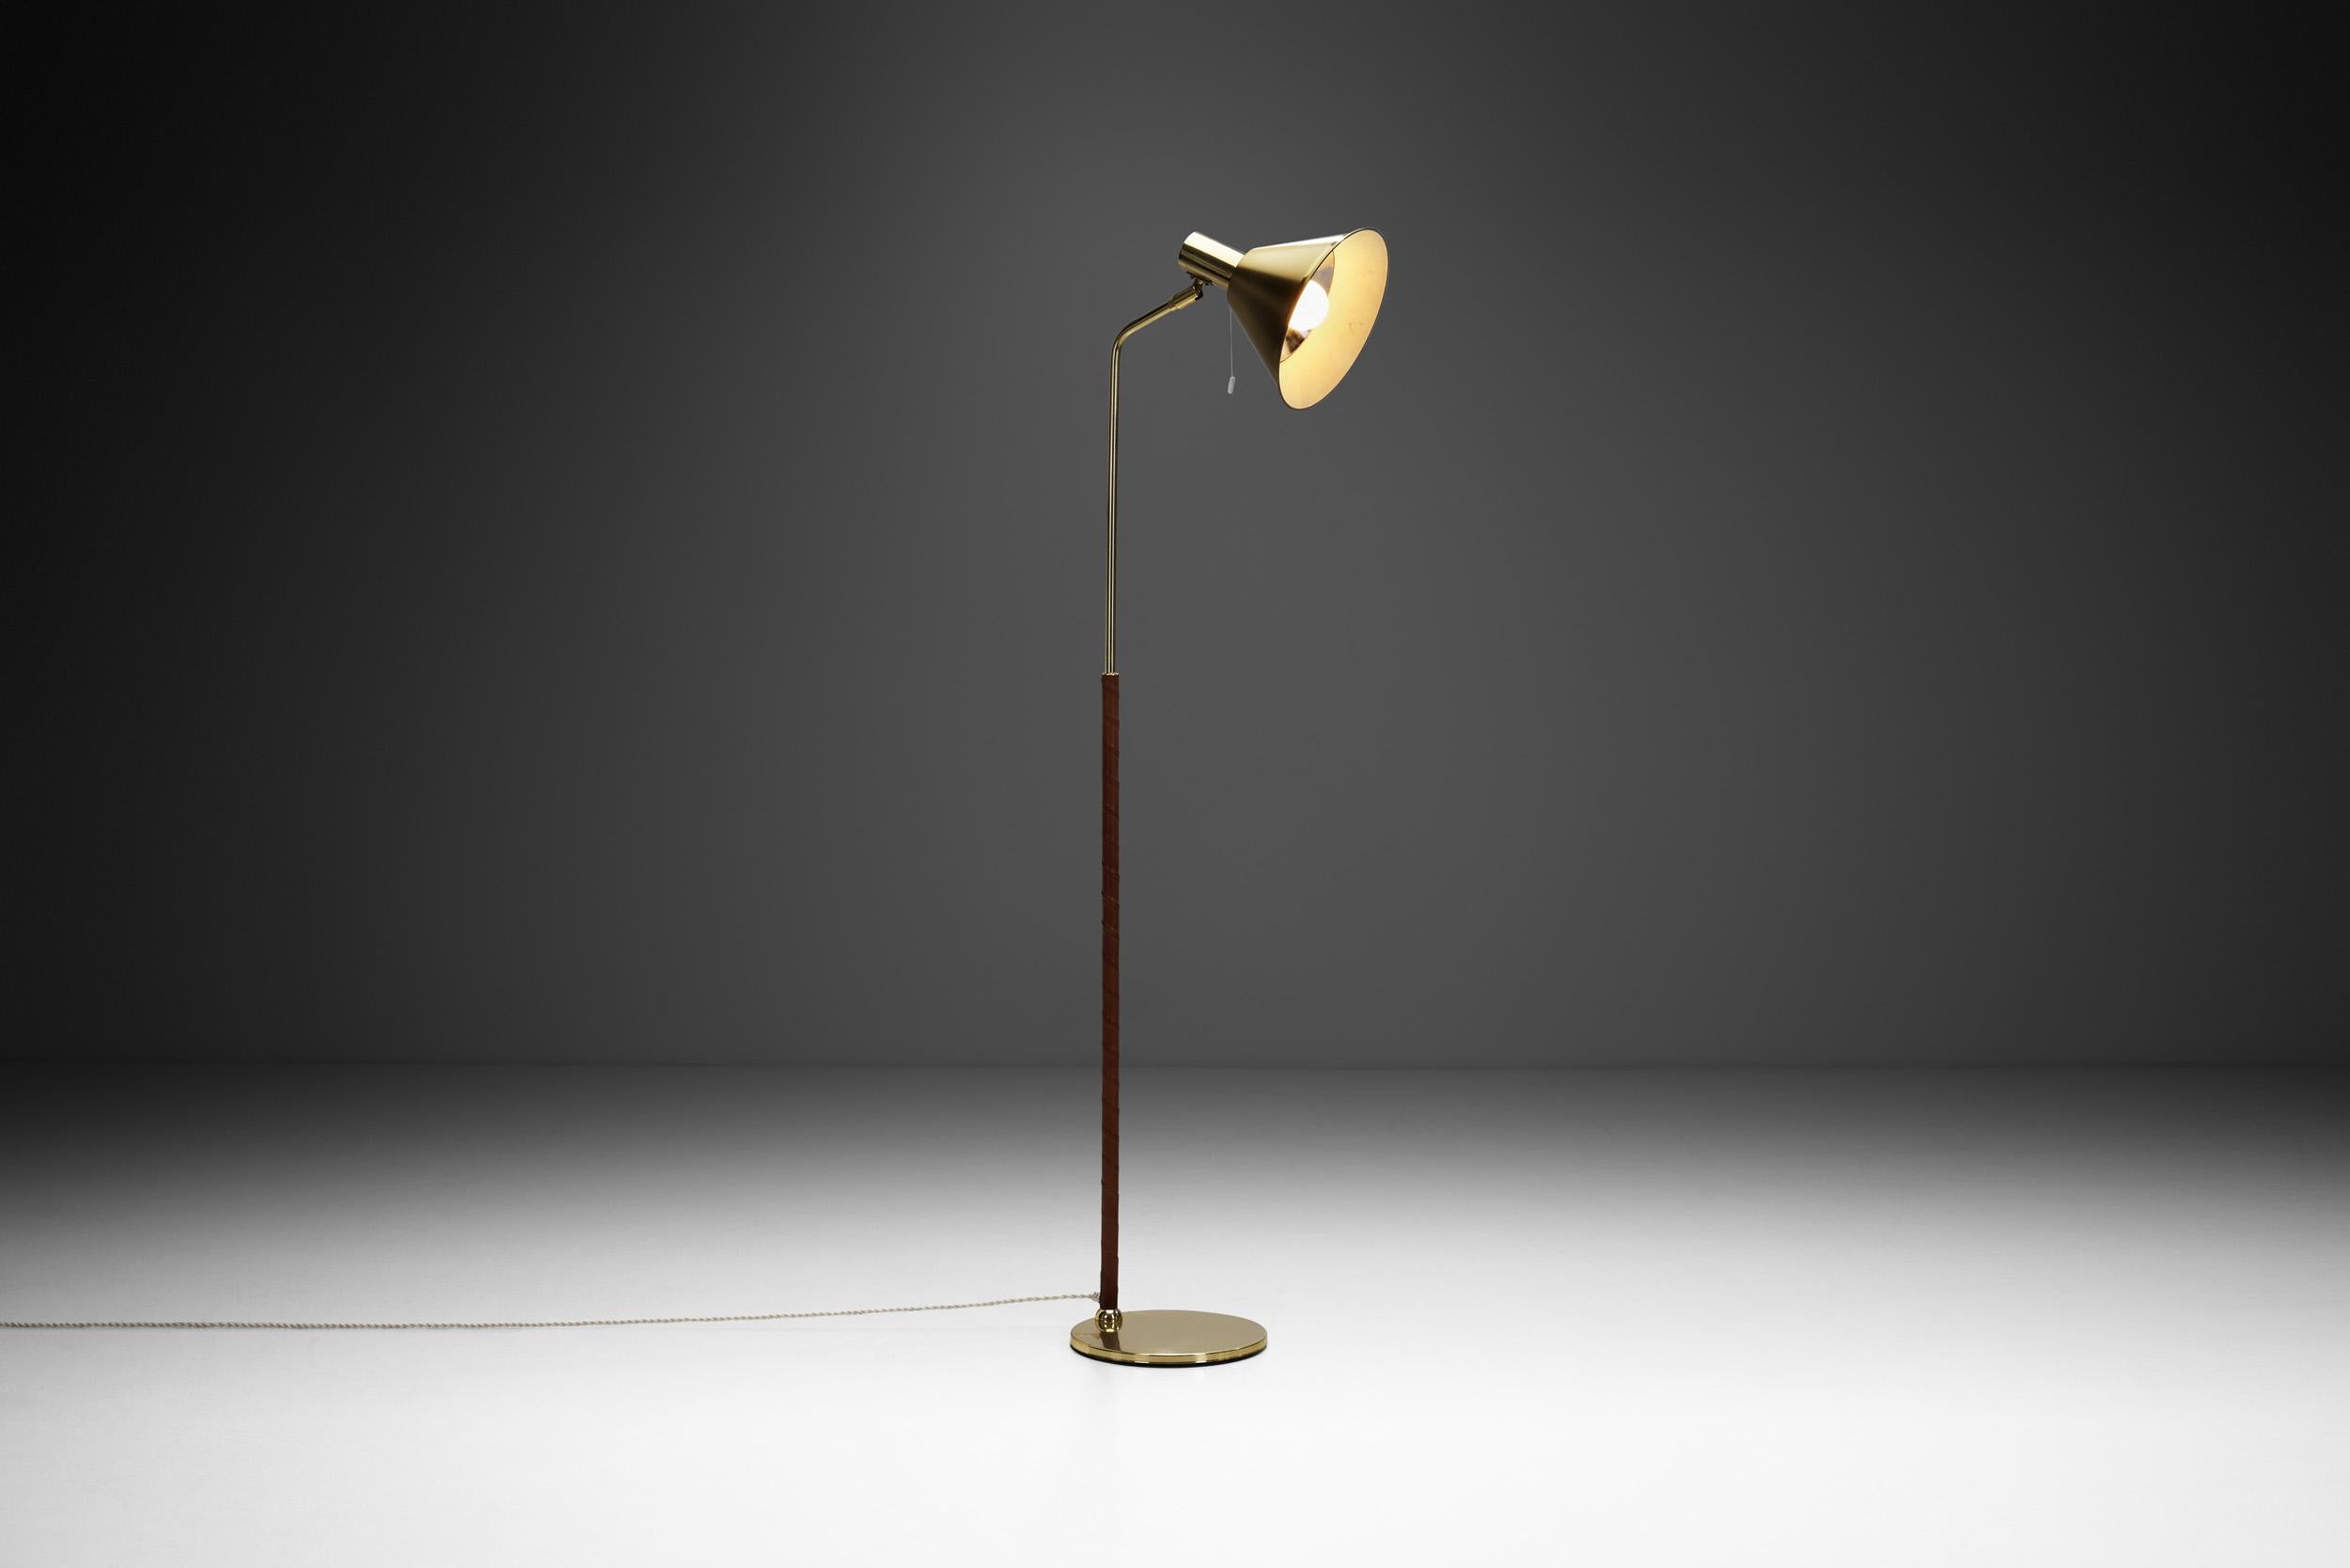 Swedish Modern, with its simplified lines and lack of excessive ornamentation, was a counter reaction to the earlier, more decorative design movements such as Art Deco. In comparison, as this floor lamp demonstrates, the midcentury era brought